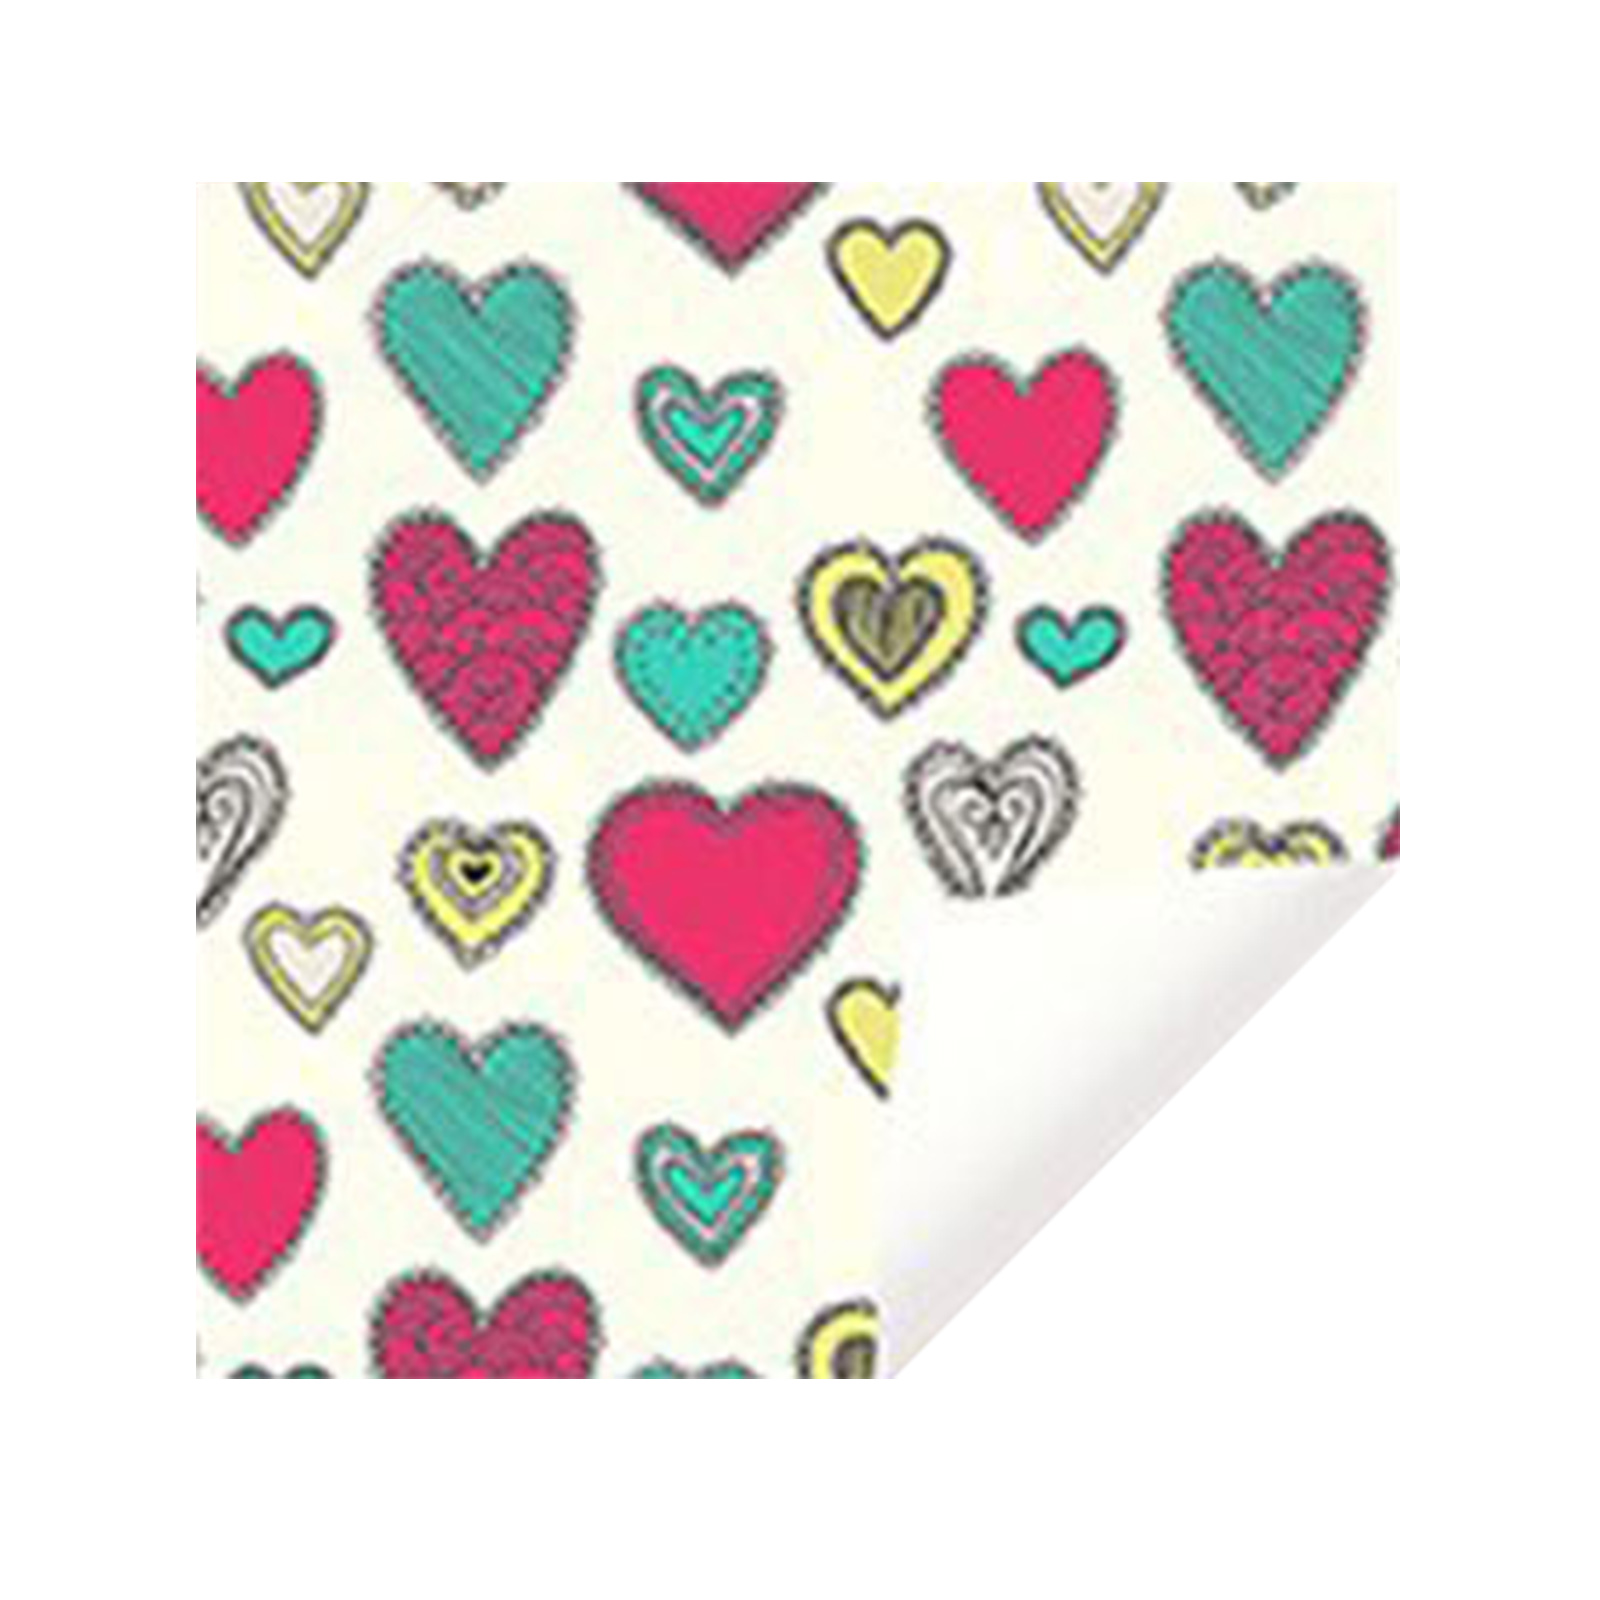 Negj Valentine's Day Wrapping Paper Colorful Gift Wrapping Paper Holiday Party Gift Love Heart Paper Shiny Wrapping Paper Sheets Welcome Bags Product